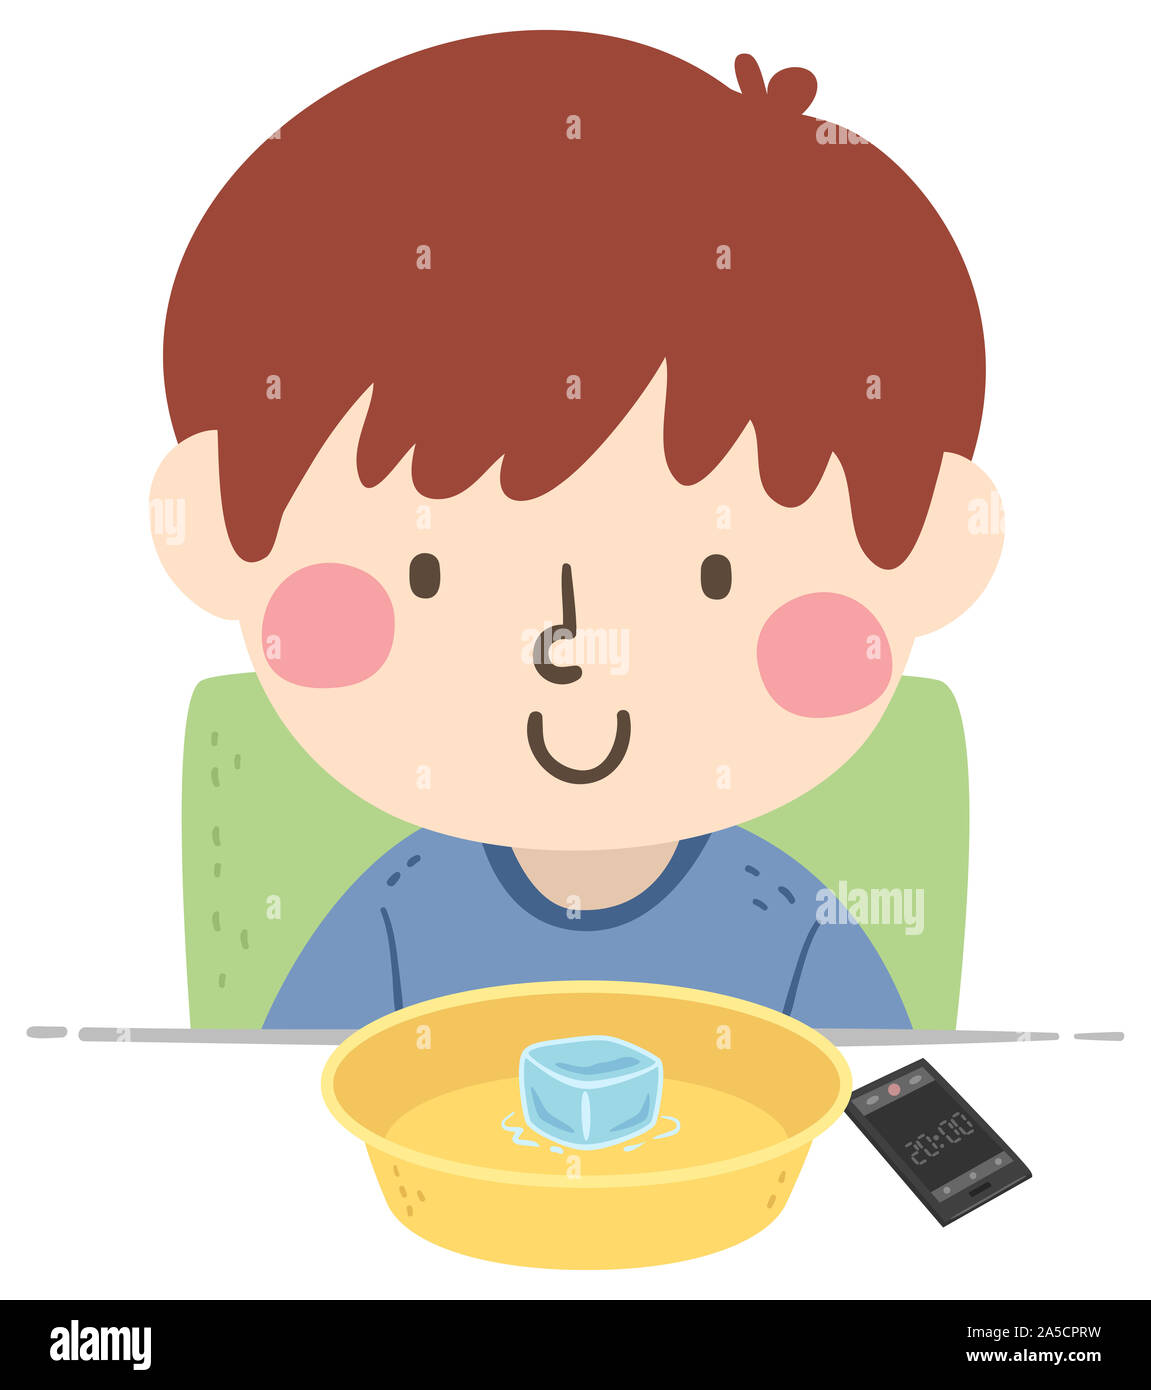 Illustration of a Kid Boy Observing and Measuring the Time an Ice Melt in a Bowl Stock Photo